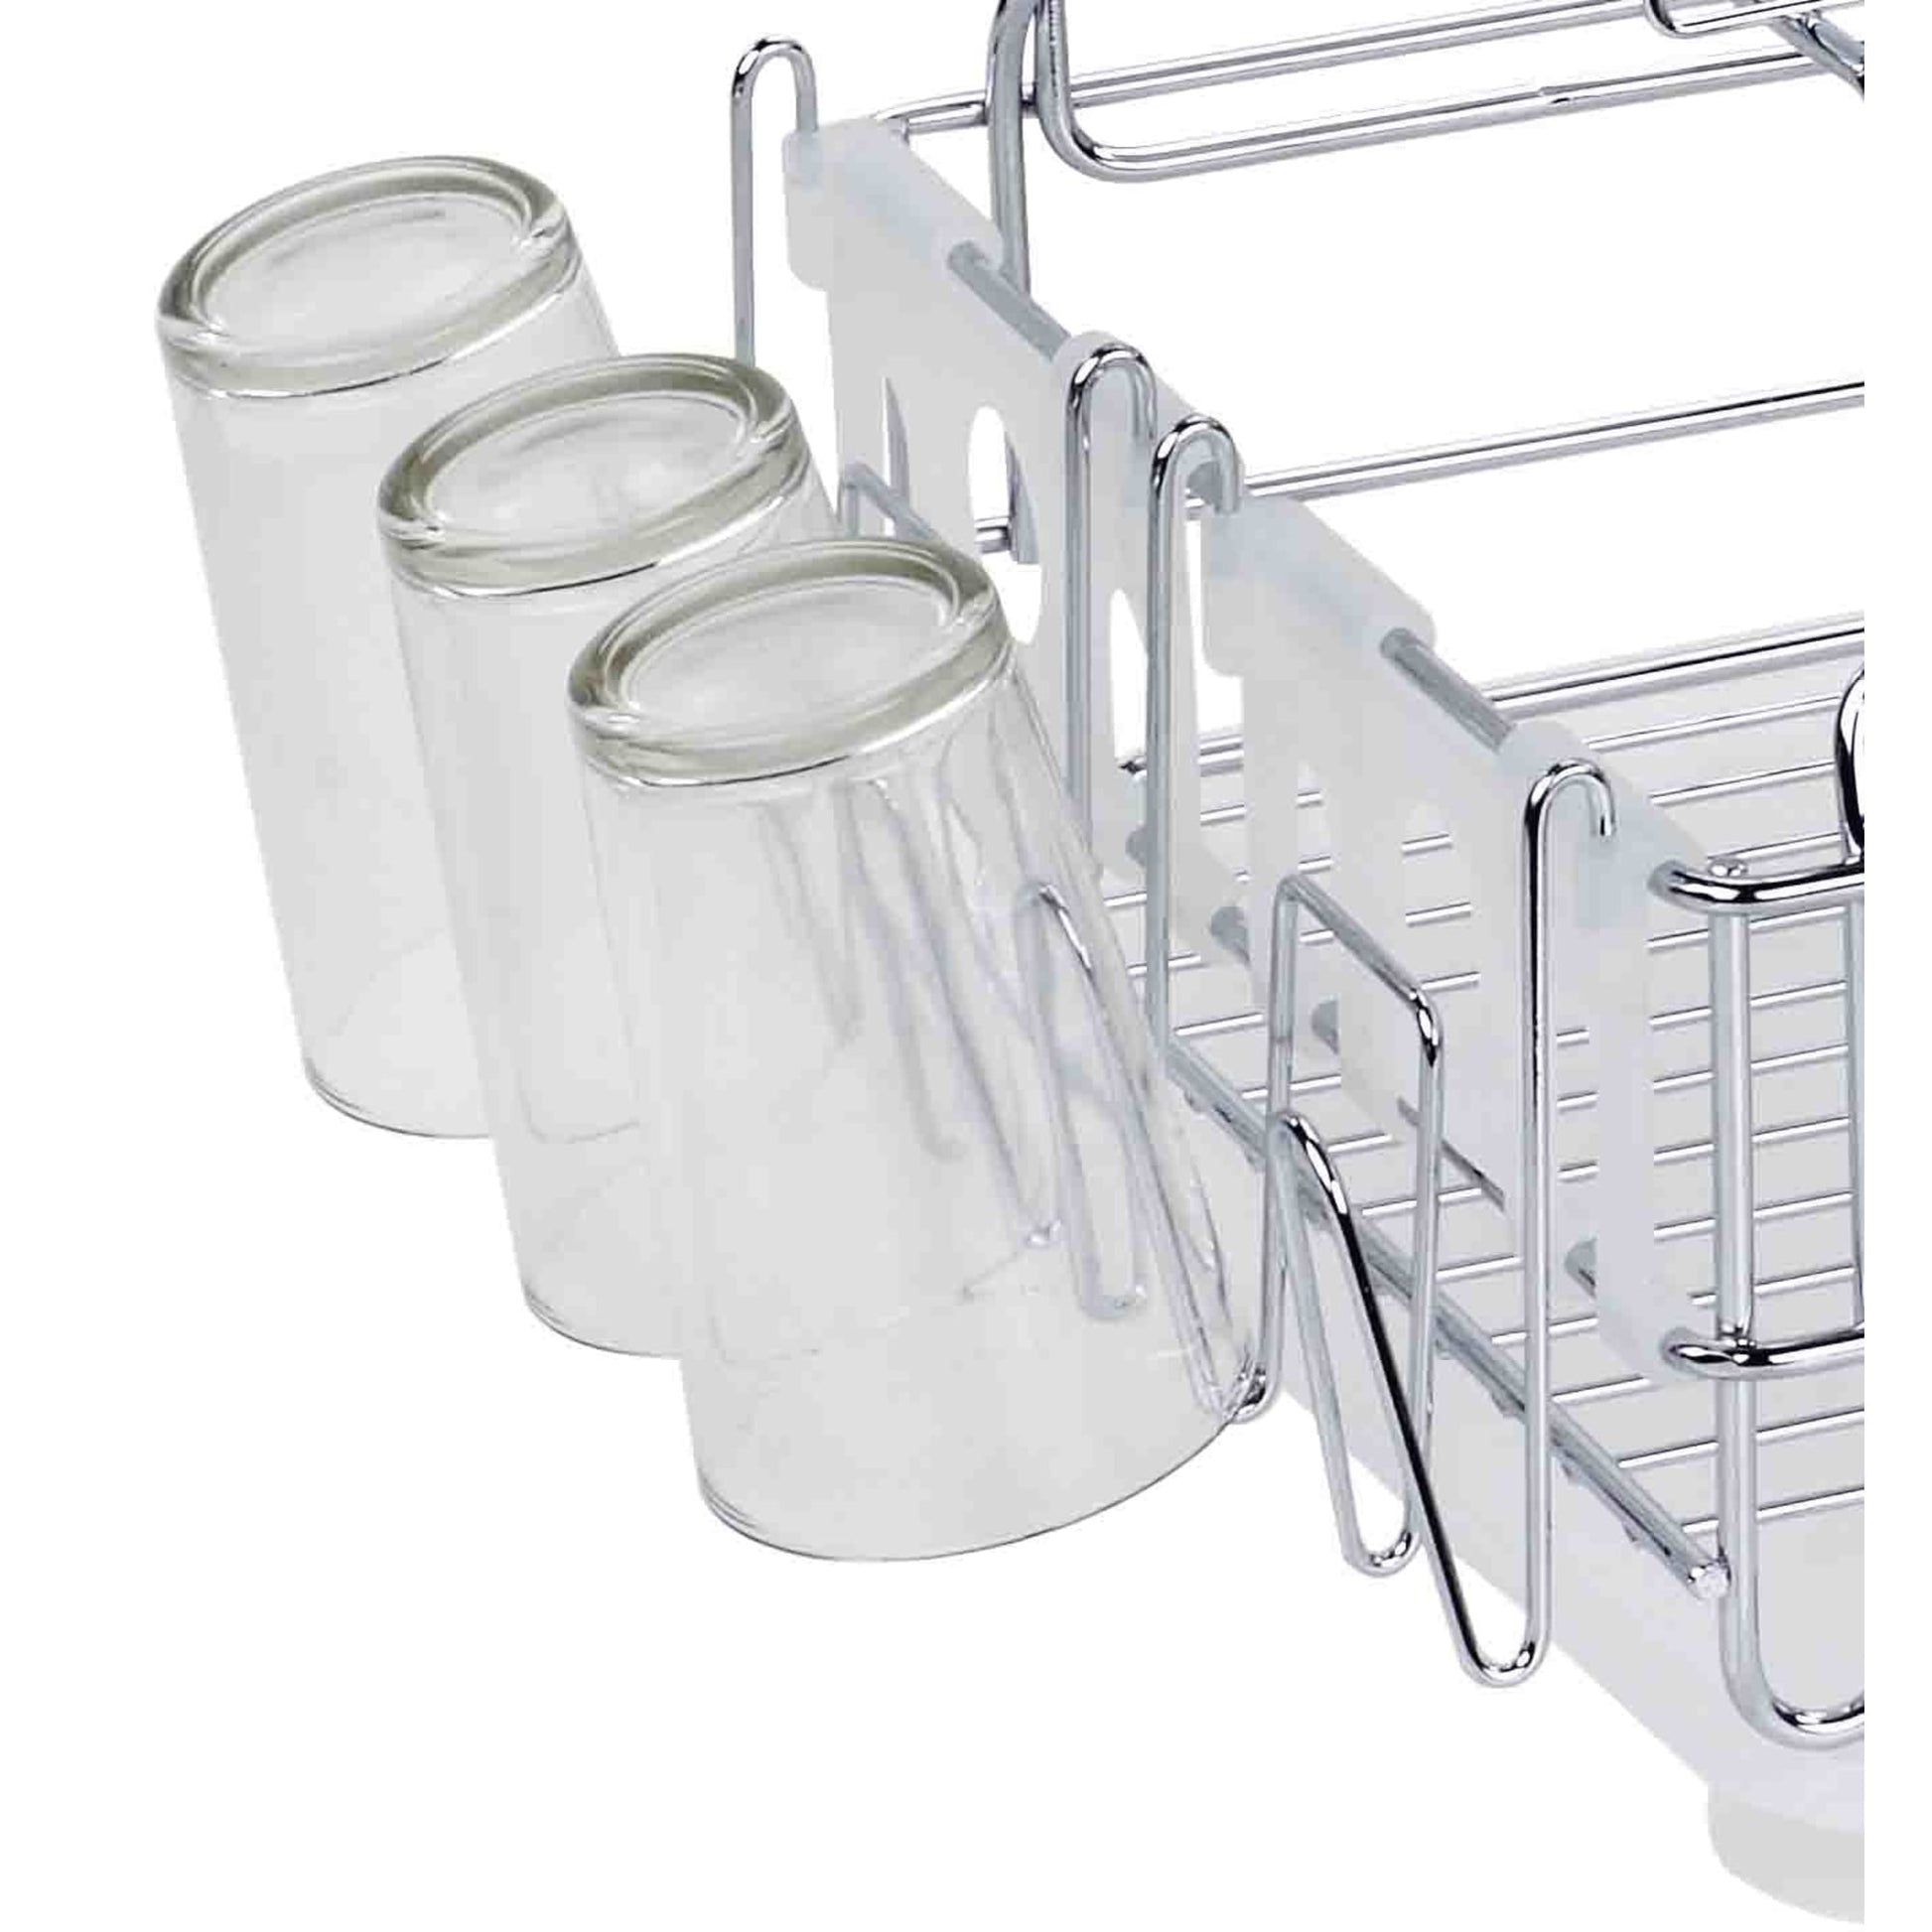 Home Basics Dish Drainer Deluxe, Red 